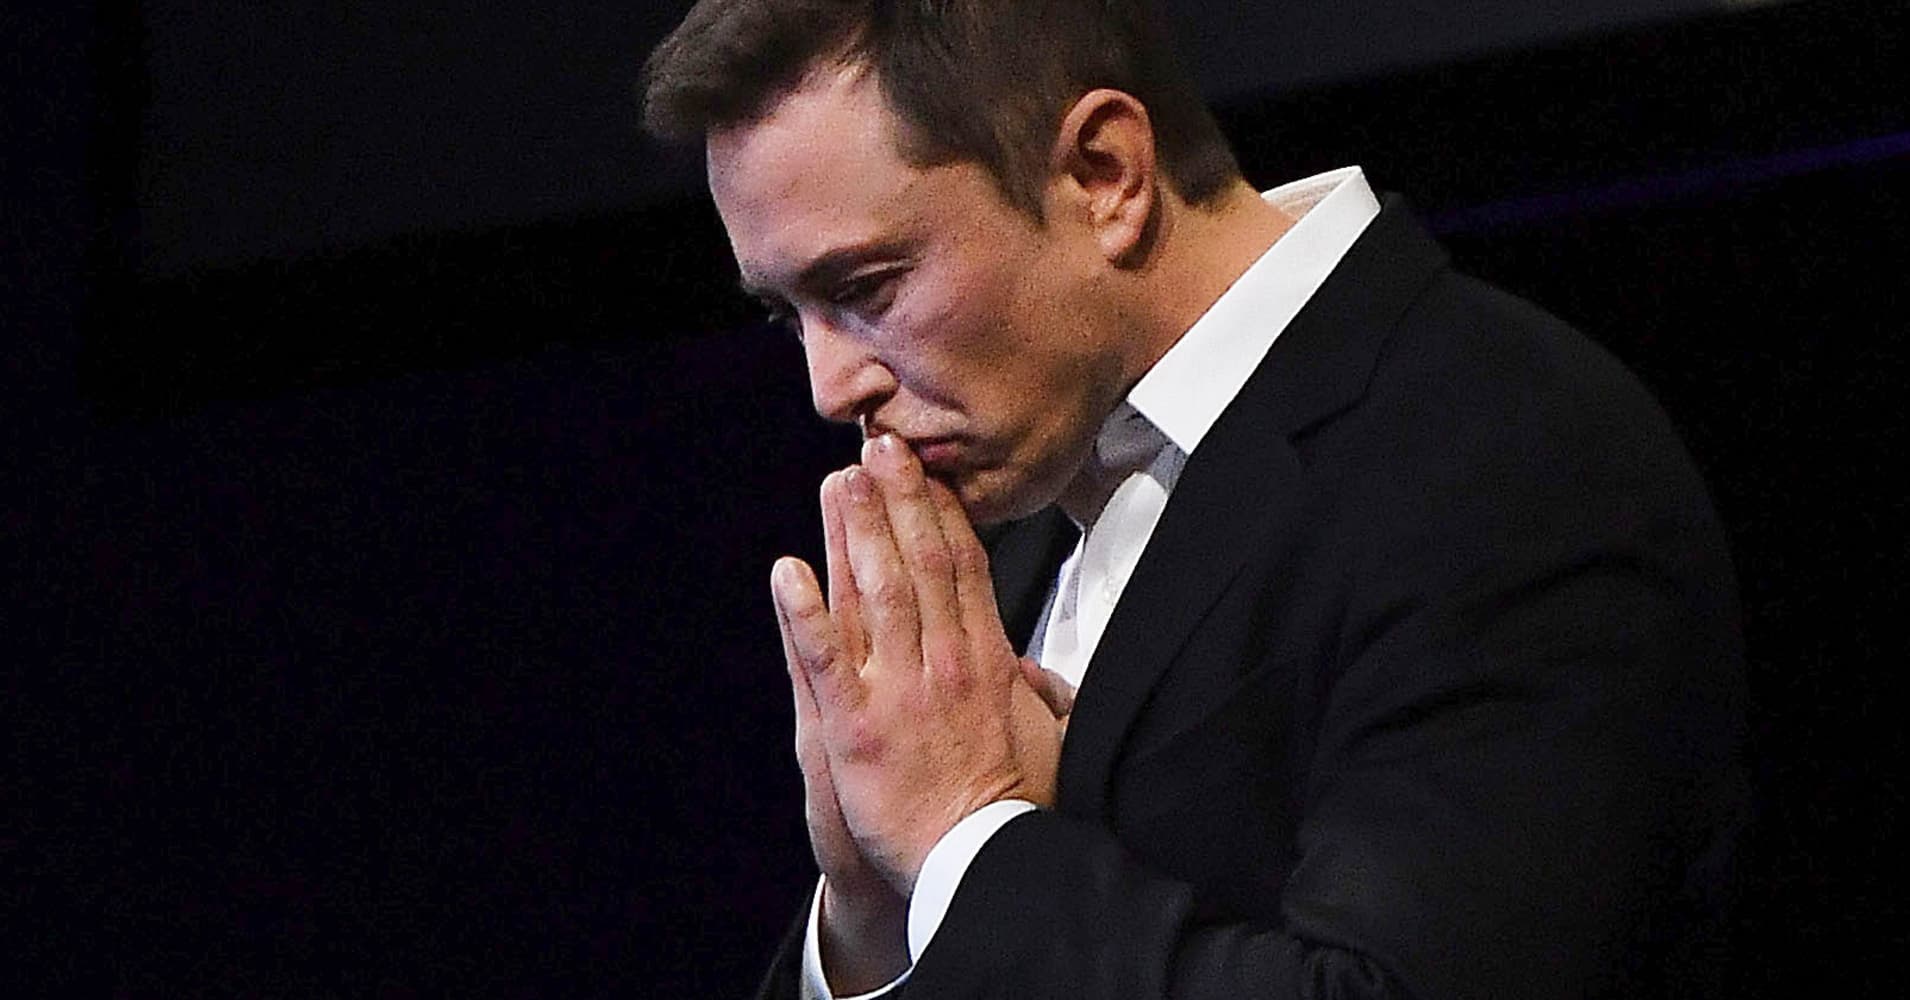 Elon Musk hiring Morgan Stanley probably closes the book on 'funding secured'